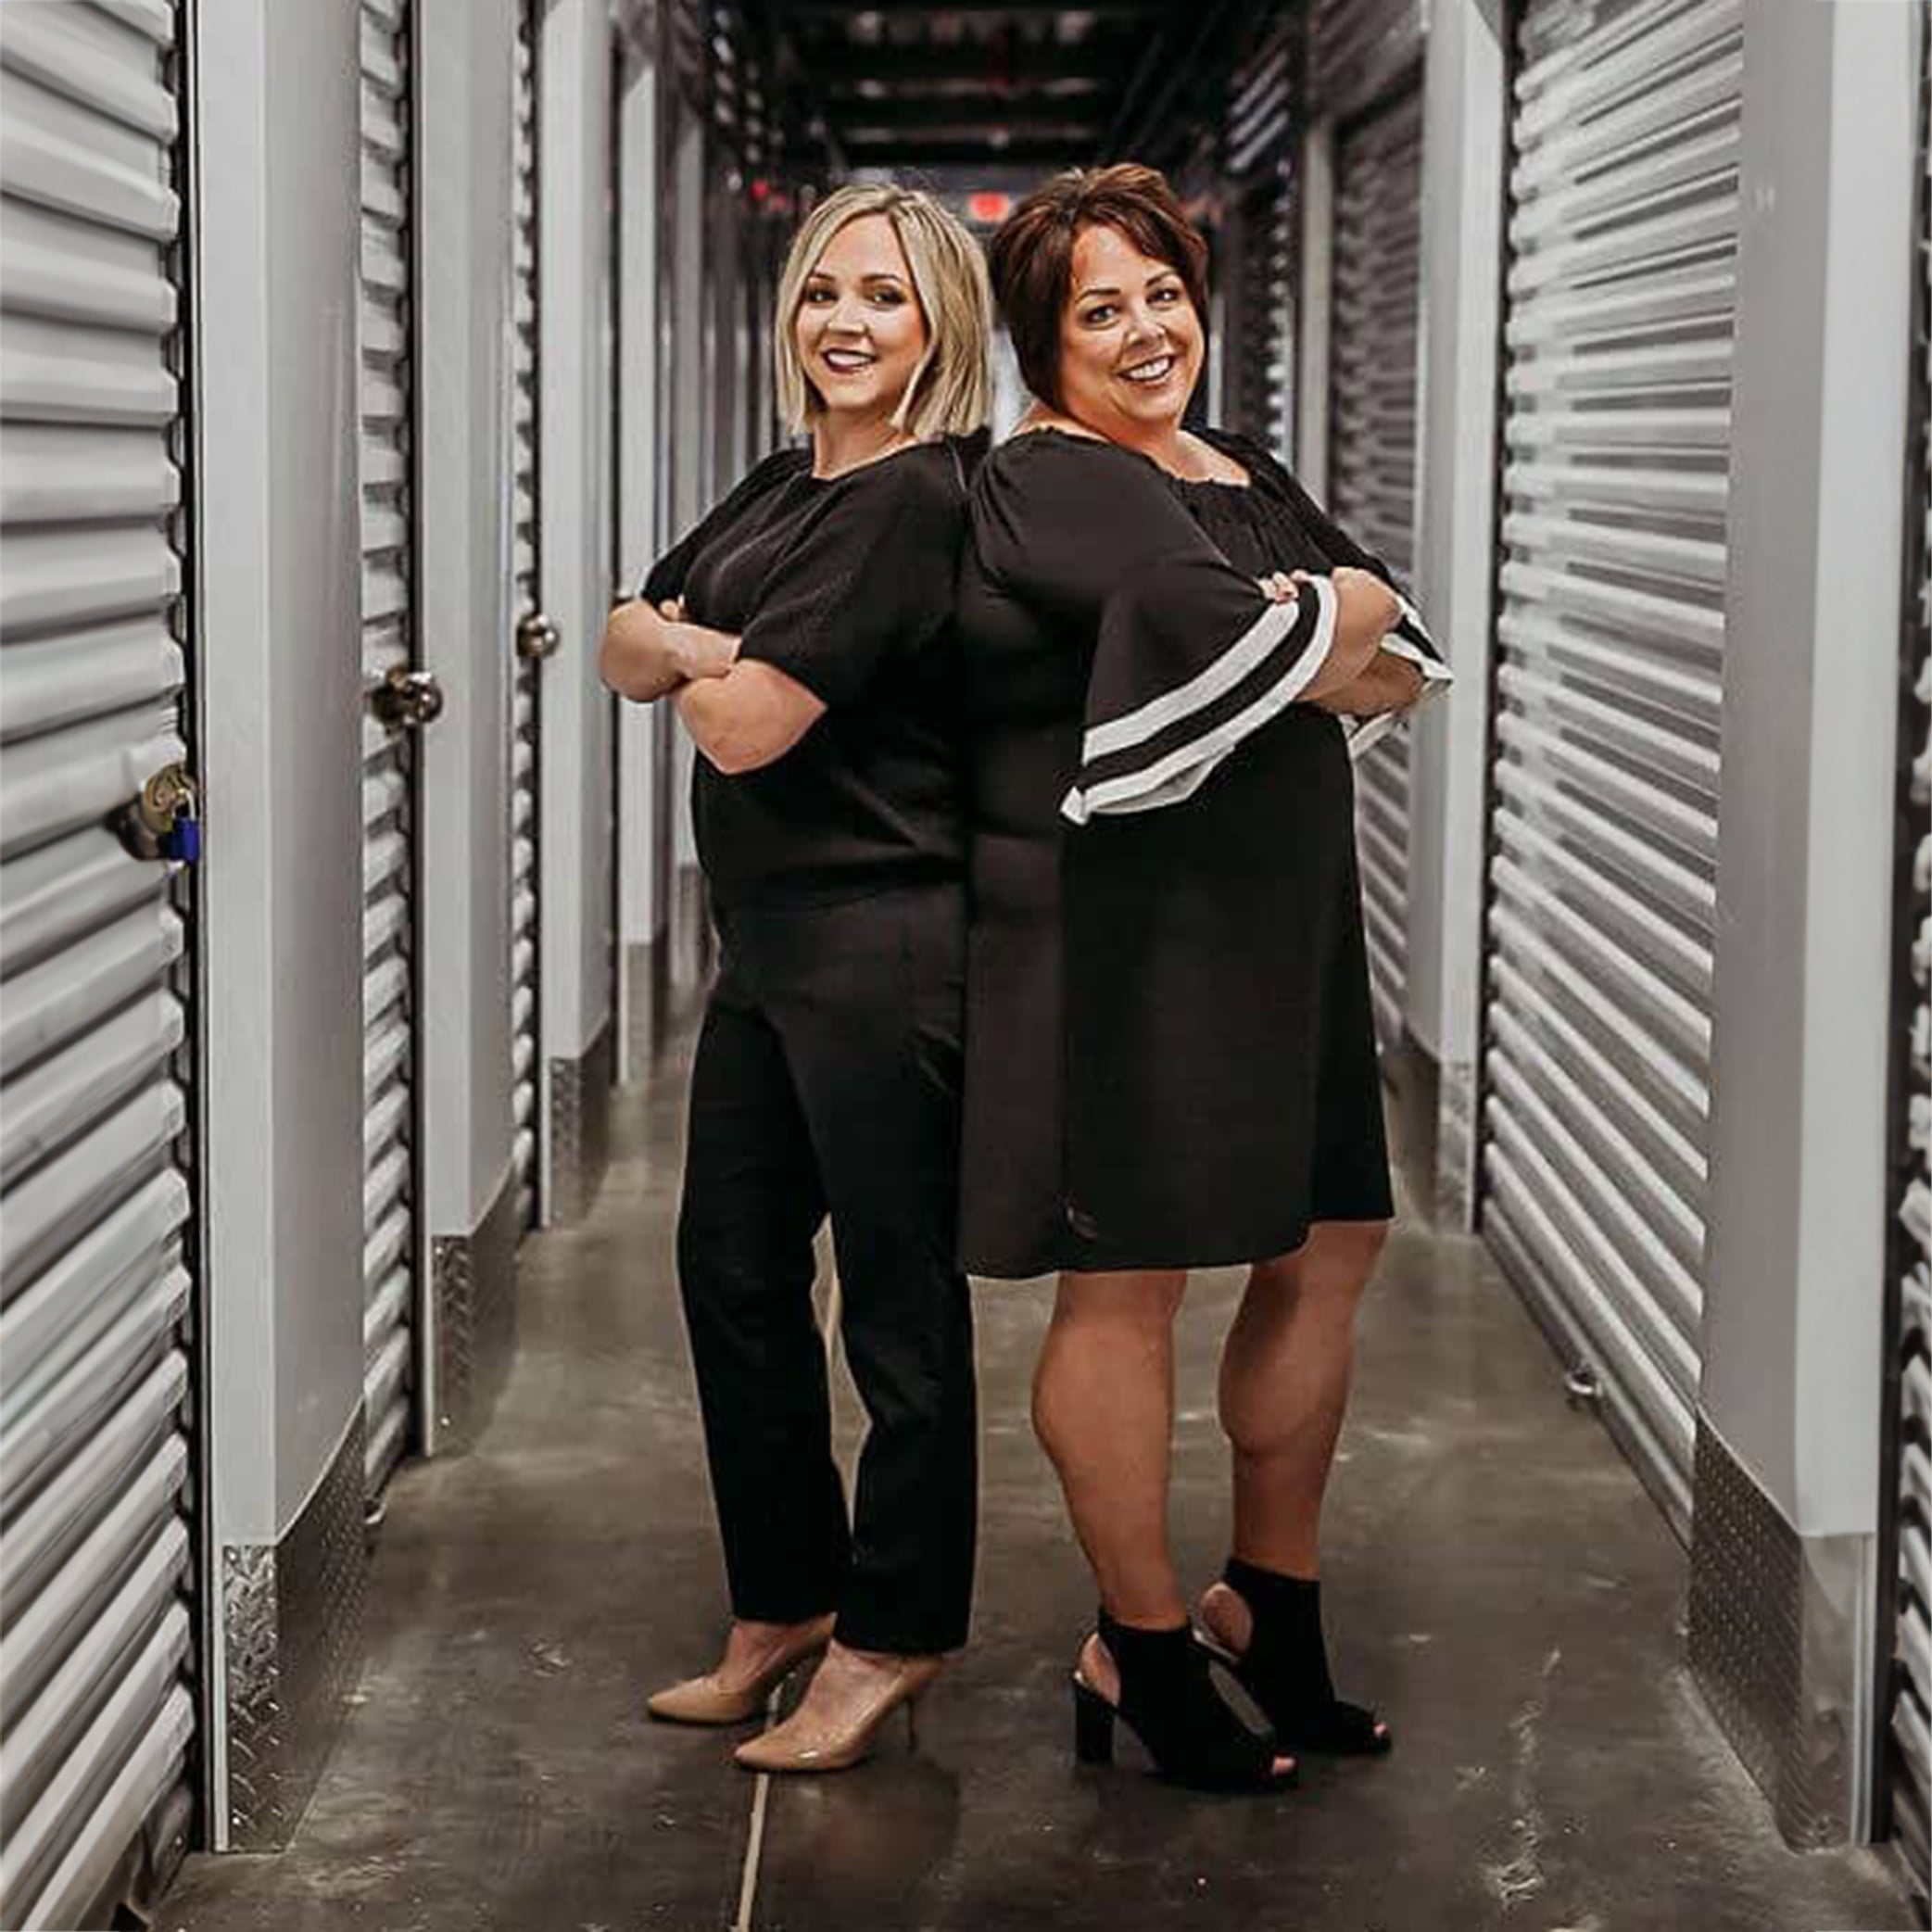 Fountain Lakes Storage owners Michelle Otto and Jessika Selsor